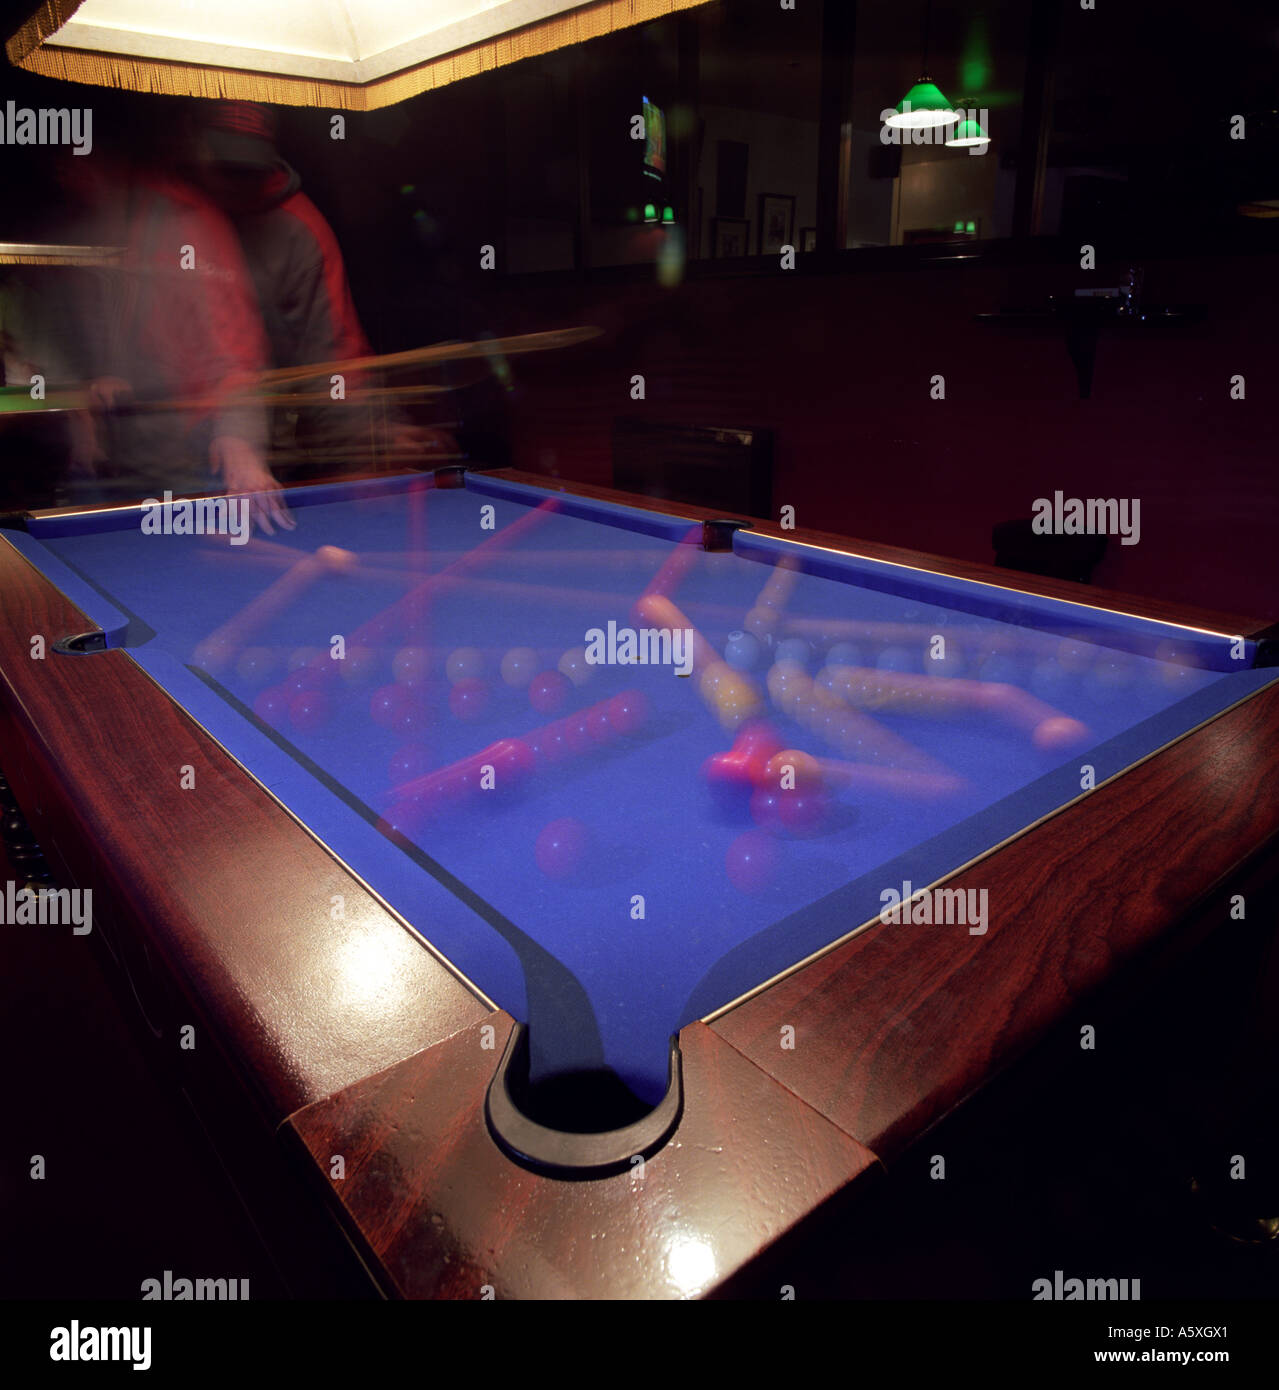 Flash and Blur of a Pool Game Stock Photo - Alamy